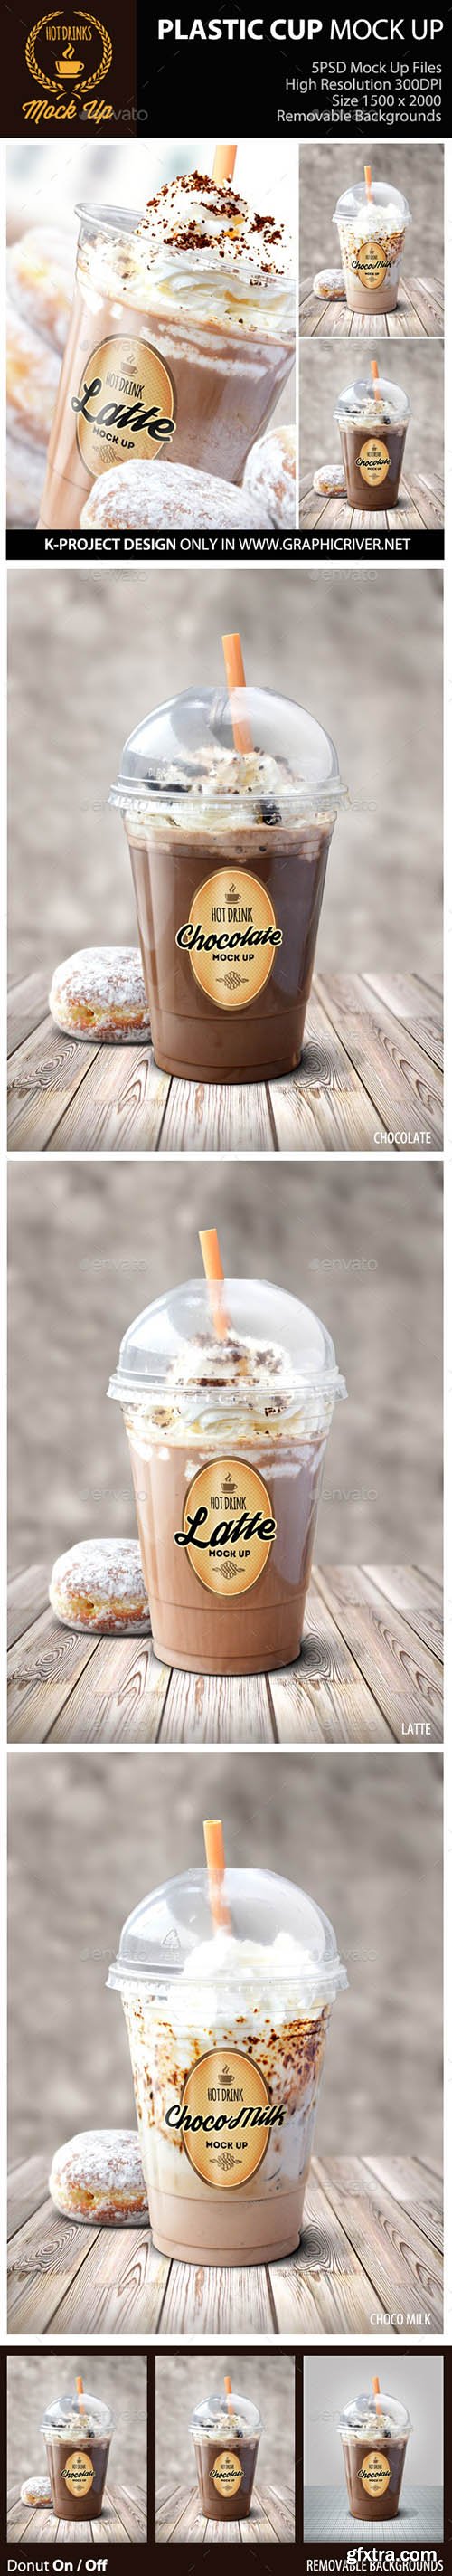 GraphicRiver Hot Drinks Plastic Cup Mock Up 10729699